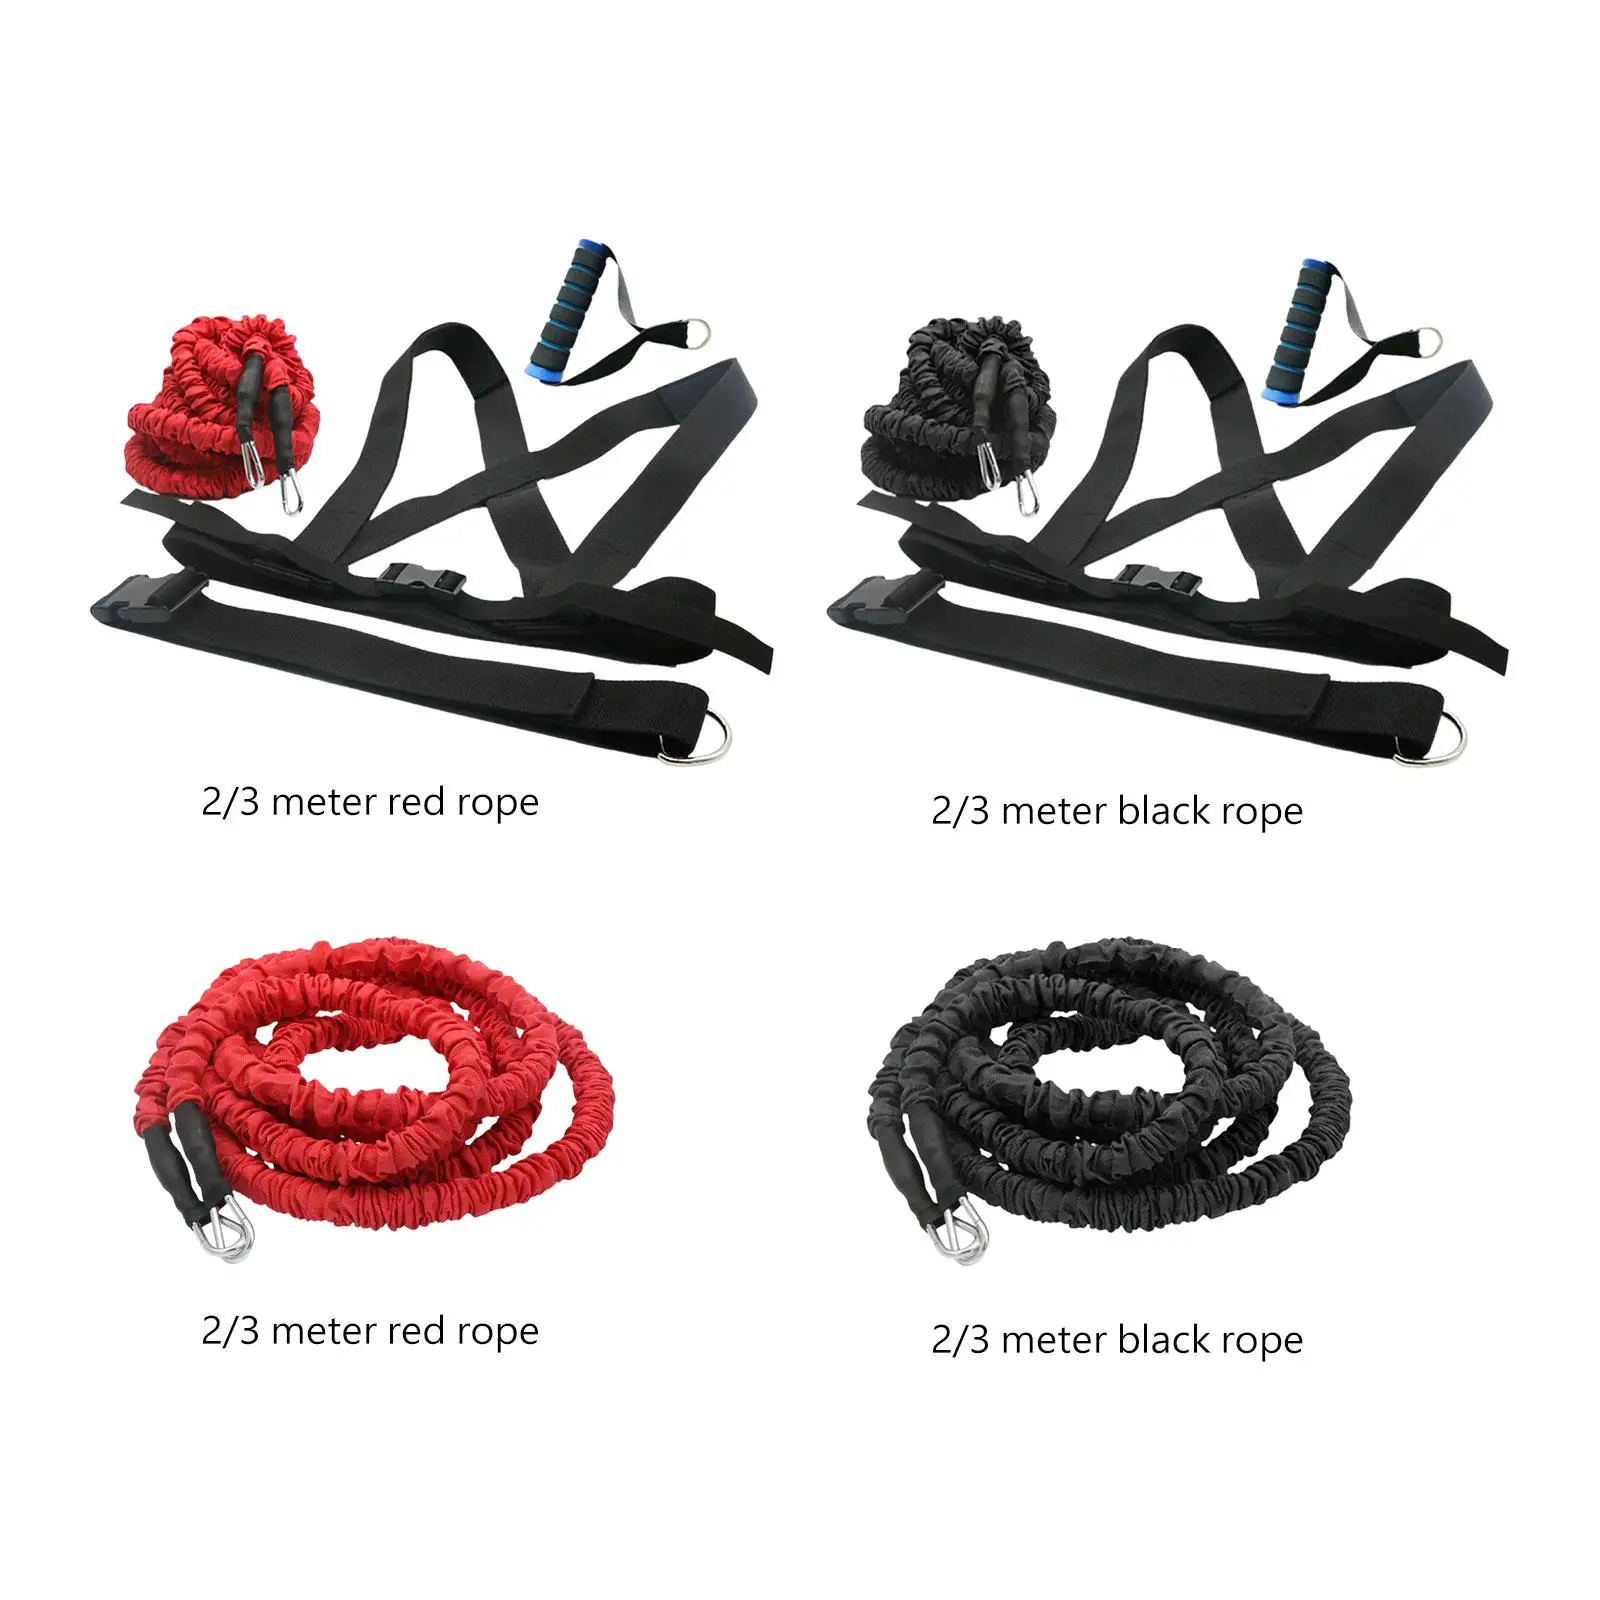 

Resistance Training Rope 50lb Resistance Bands for Speed Strength Football